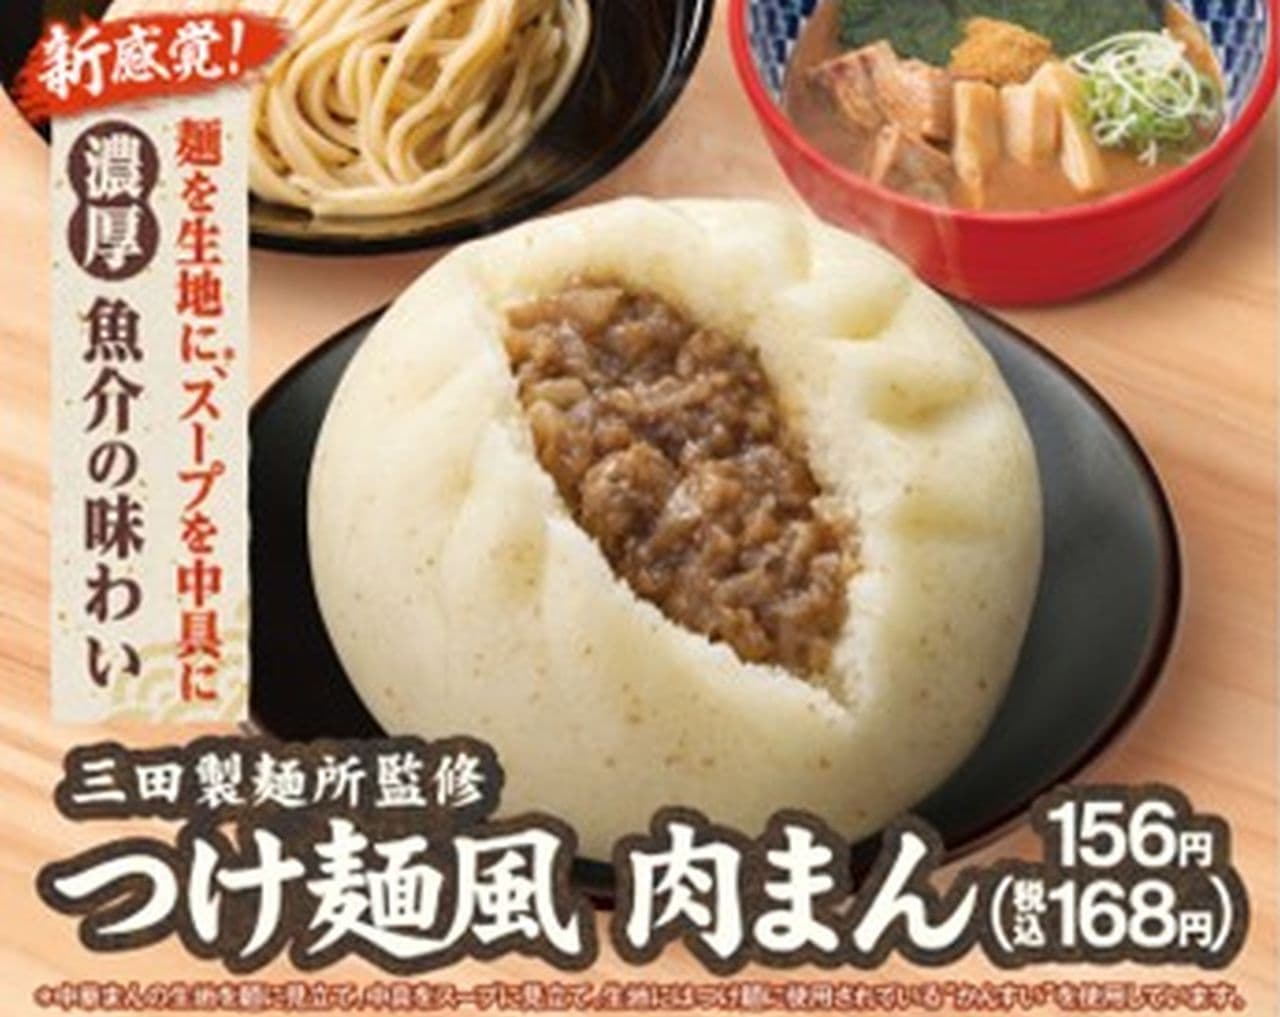 Famima "Tsukemen-style steamed buns" supervised by Mita Noodle Factory